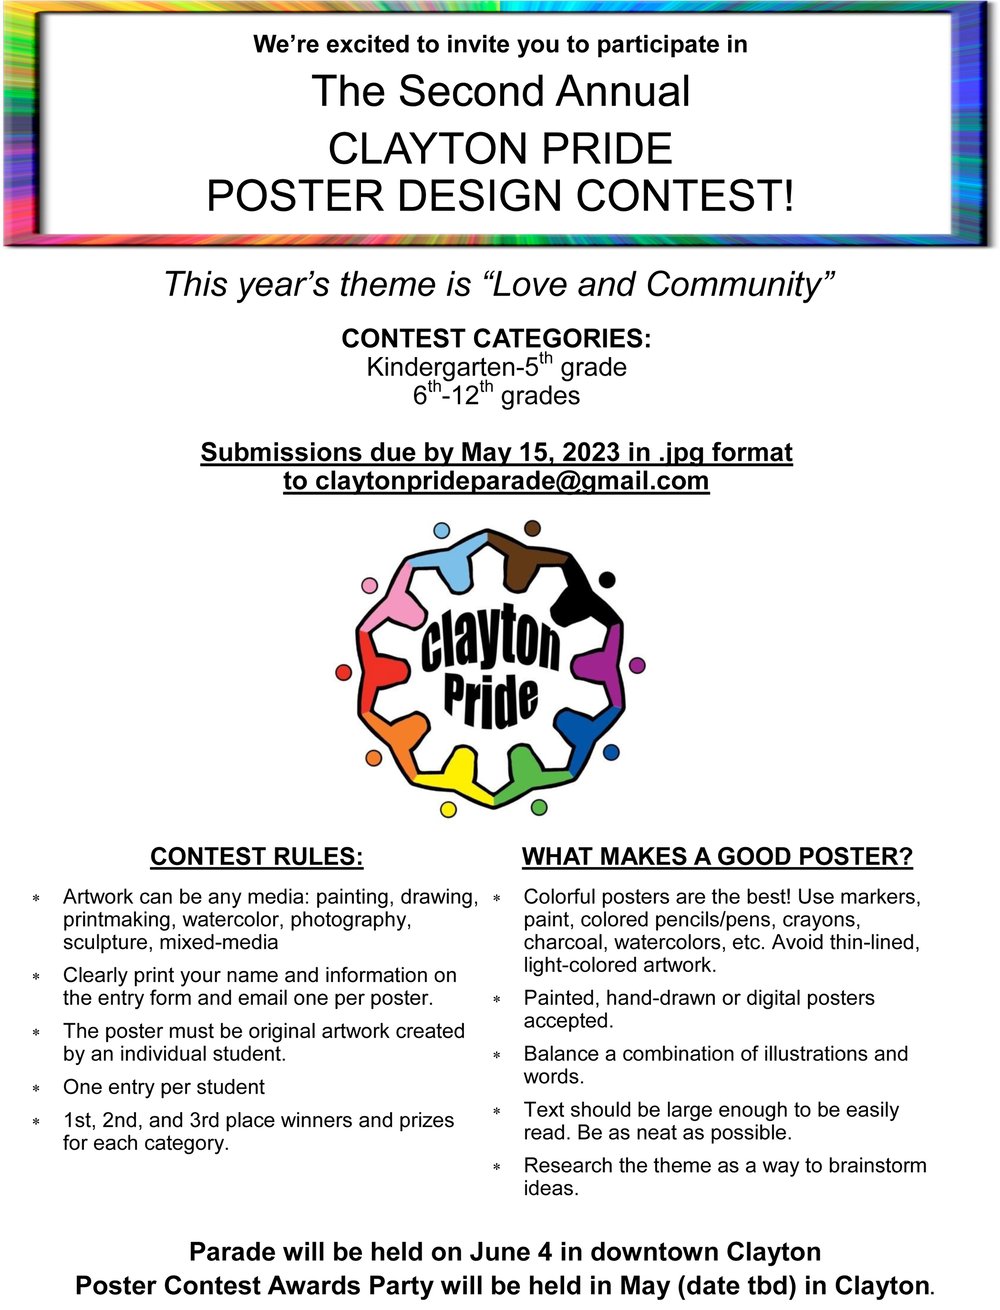 Design Competition: Create the artwork for the 2023 parade!